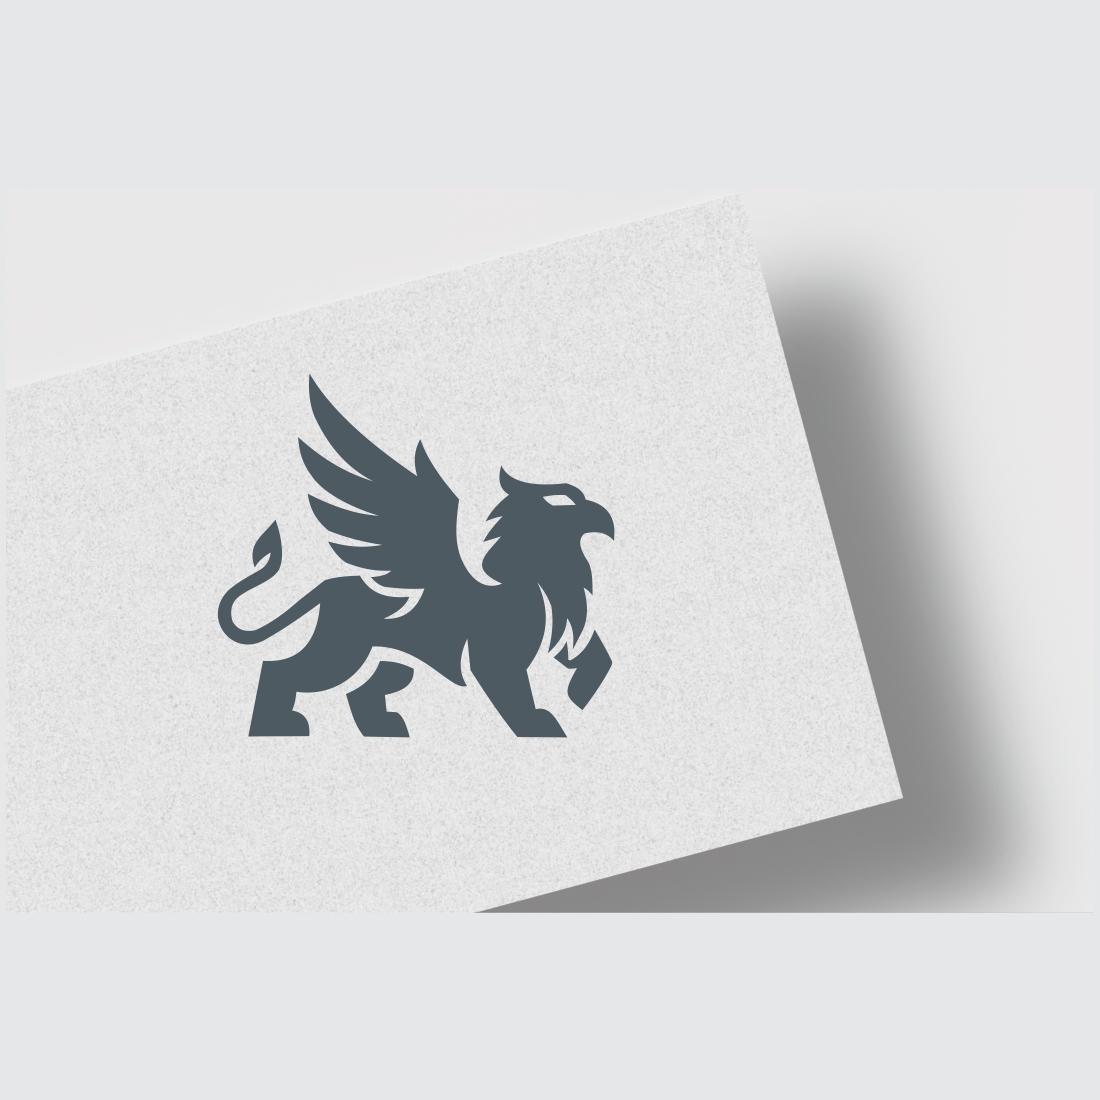 gryphon financial griffin logo5 748